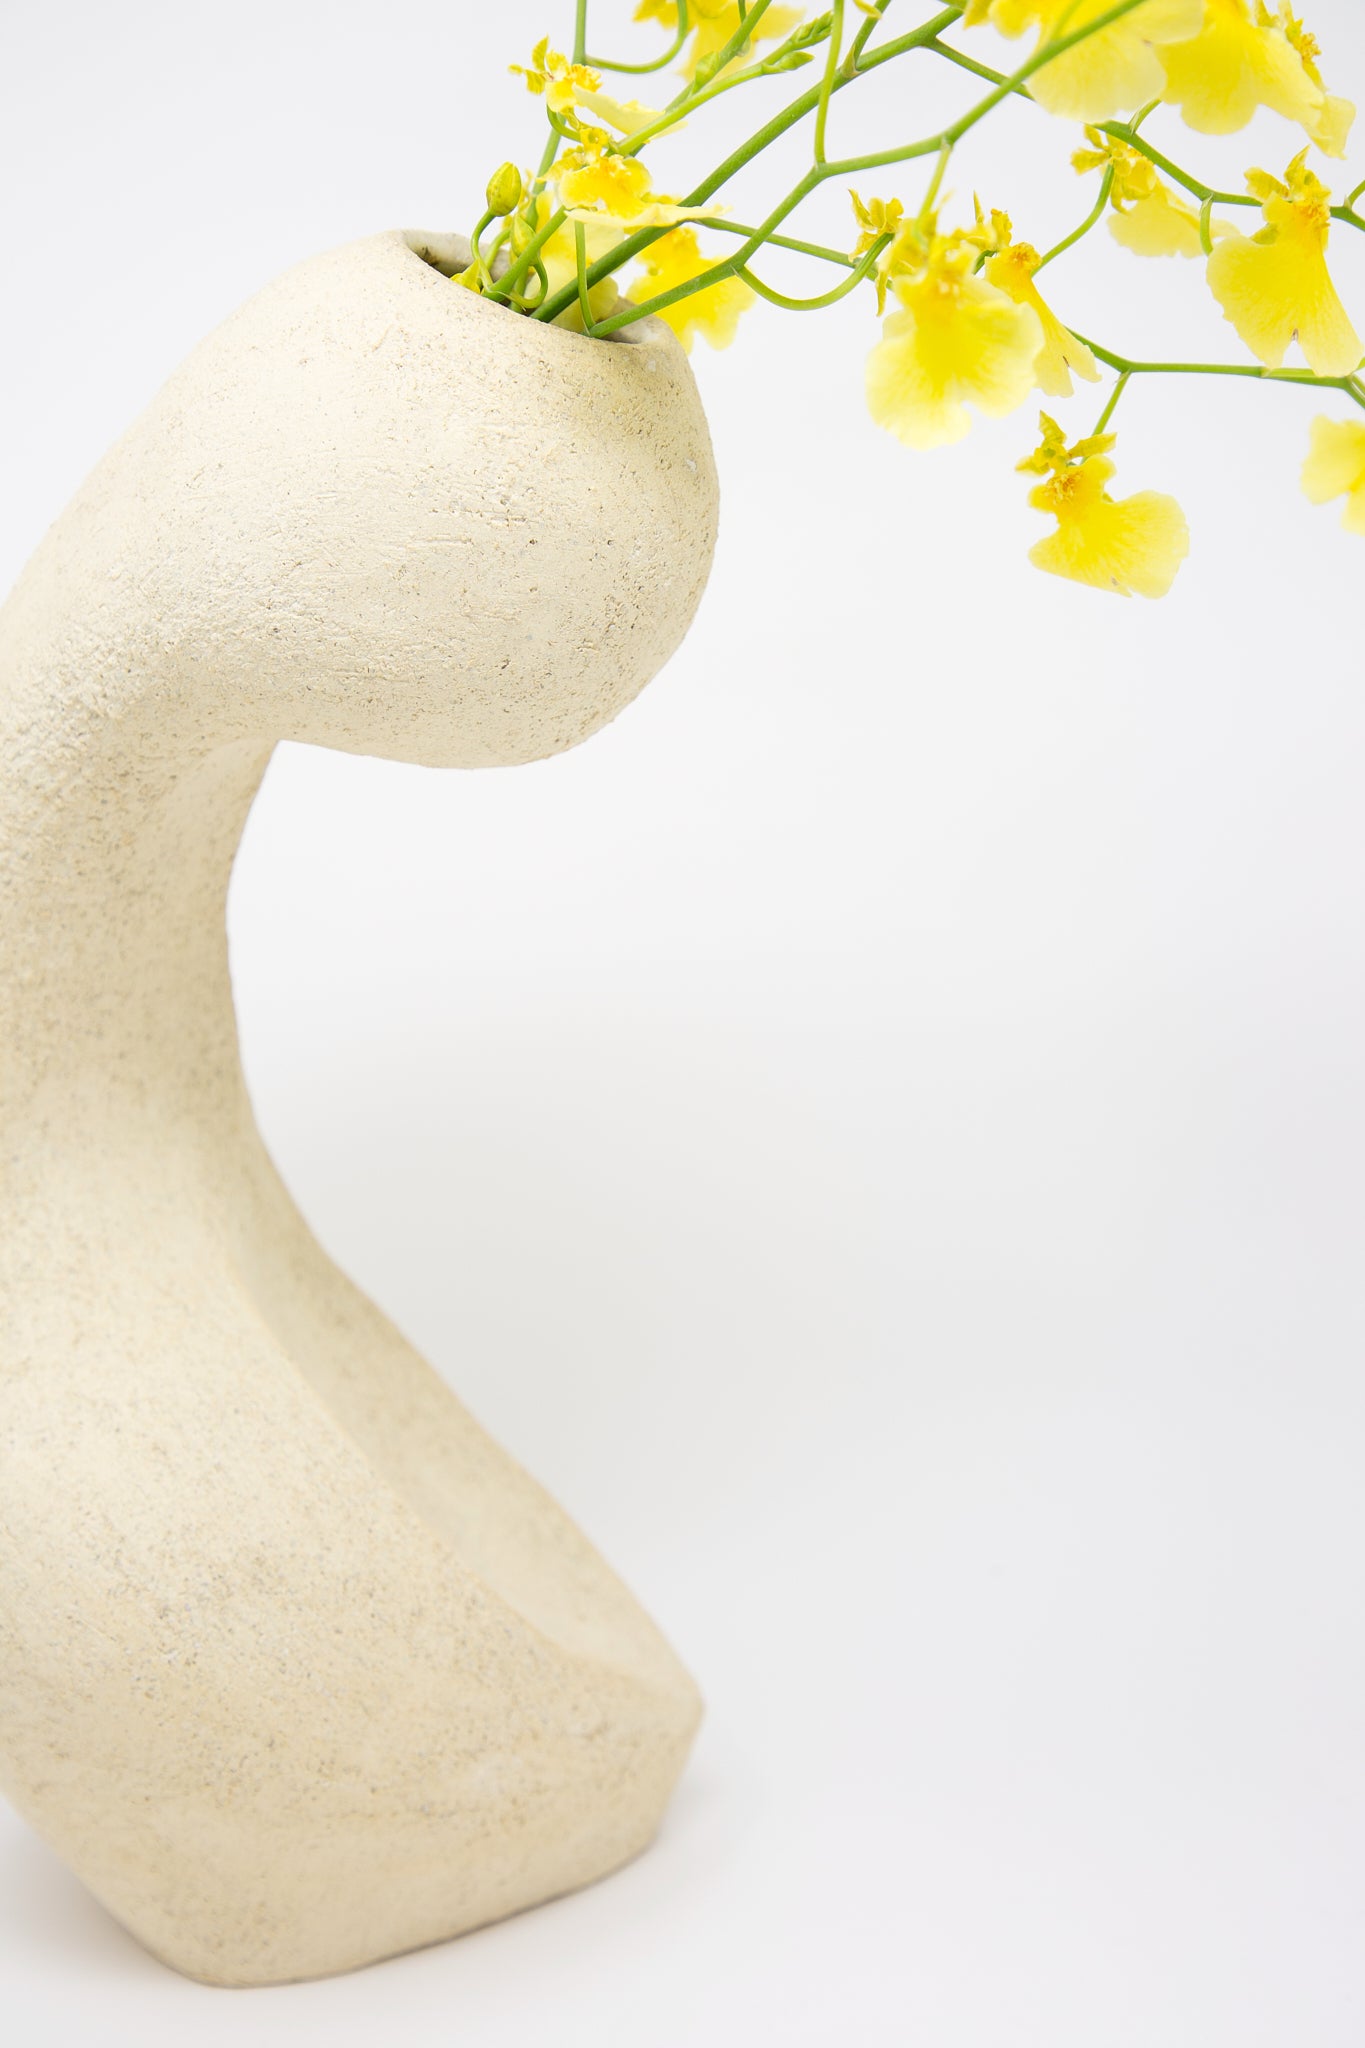 A Lost Quarry Large Hand Built Vessel No. 000711 Bud Vase with textured white sculpture clay, showcasing beautiful floral arrangements of yellow flowers.